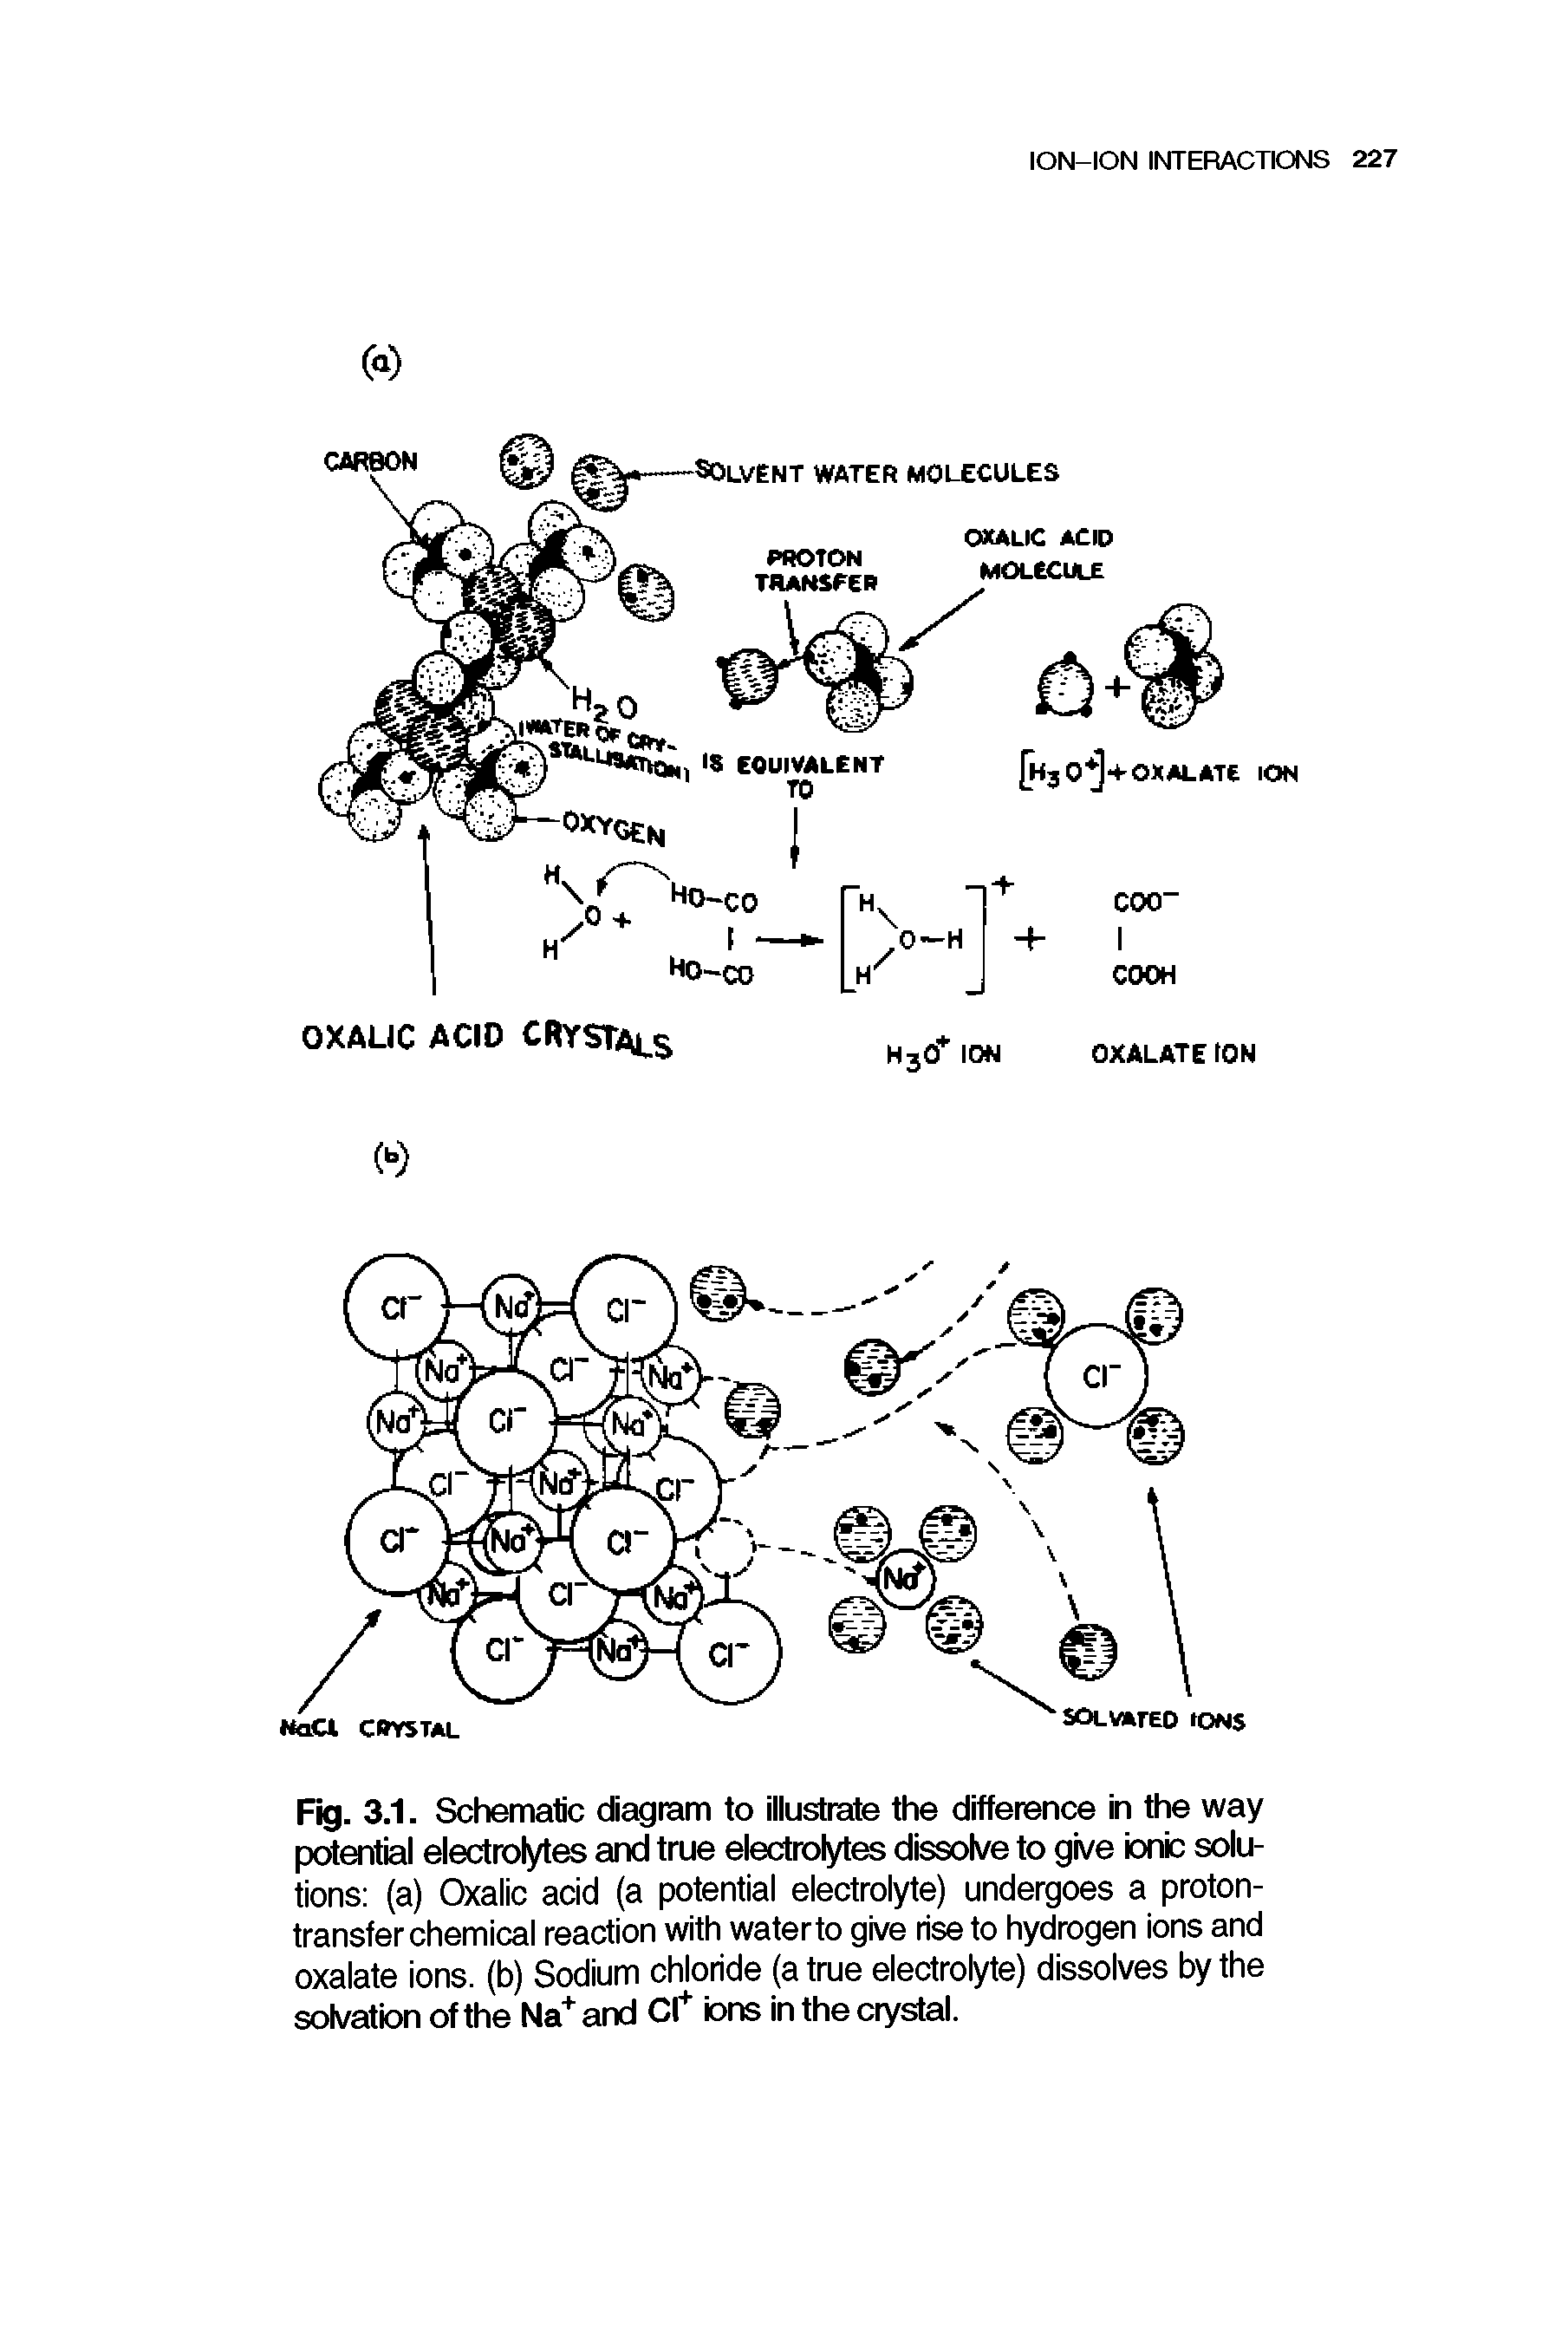 Fig. 3.1. Schematic diagnam to illustrate the difference in the way potential electrolytes and true electrolytes dissolve to give ionb solutions (a) Oxalic acid (a potential electrolyte) undergoes a proton-transfer chemical reaction with waterto give rise to hydrogen ions and oxalate ions, (b) Sodium chloride (a true electrolyte) dissolves by the solvation of the Na and Cl bns in the crystal.